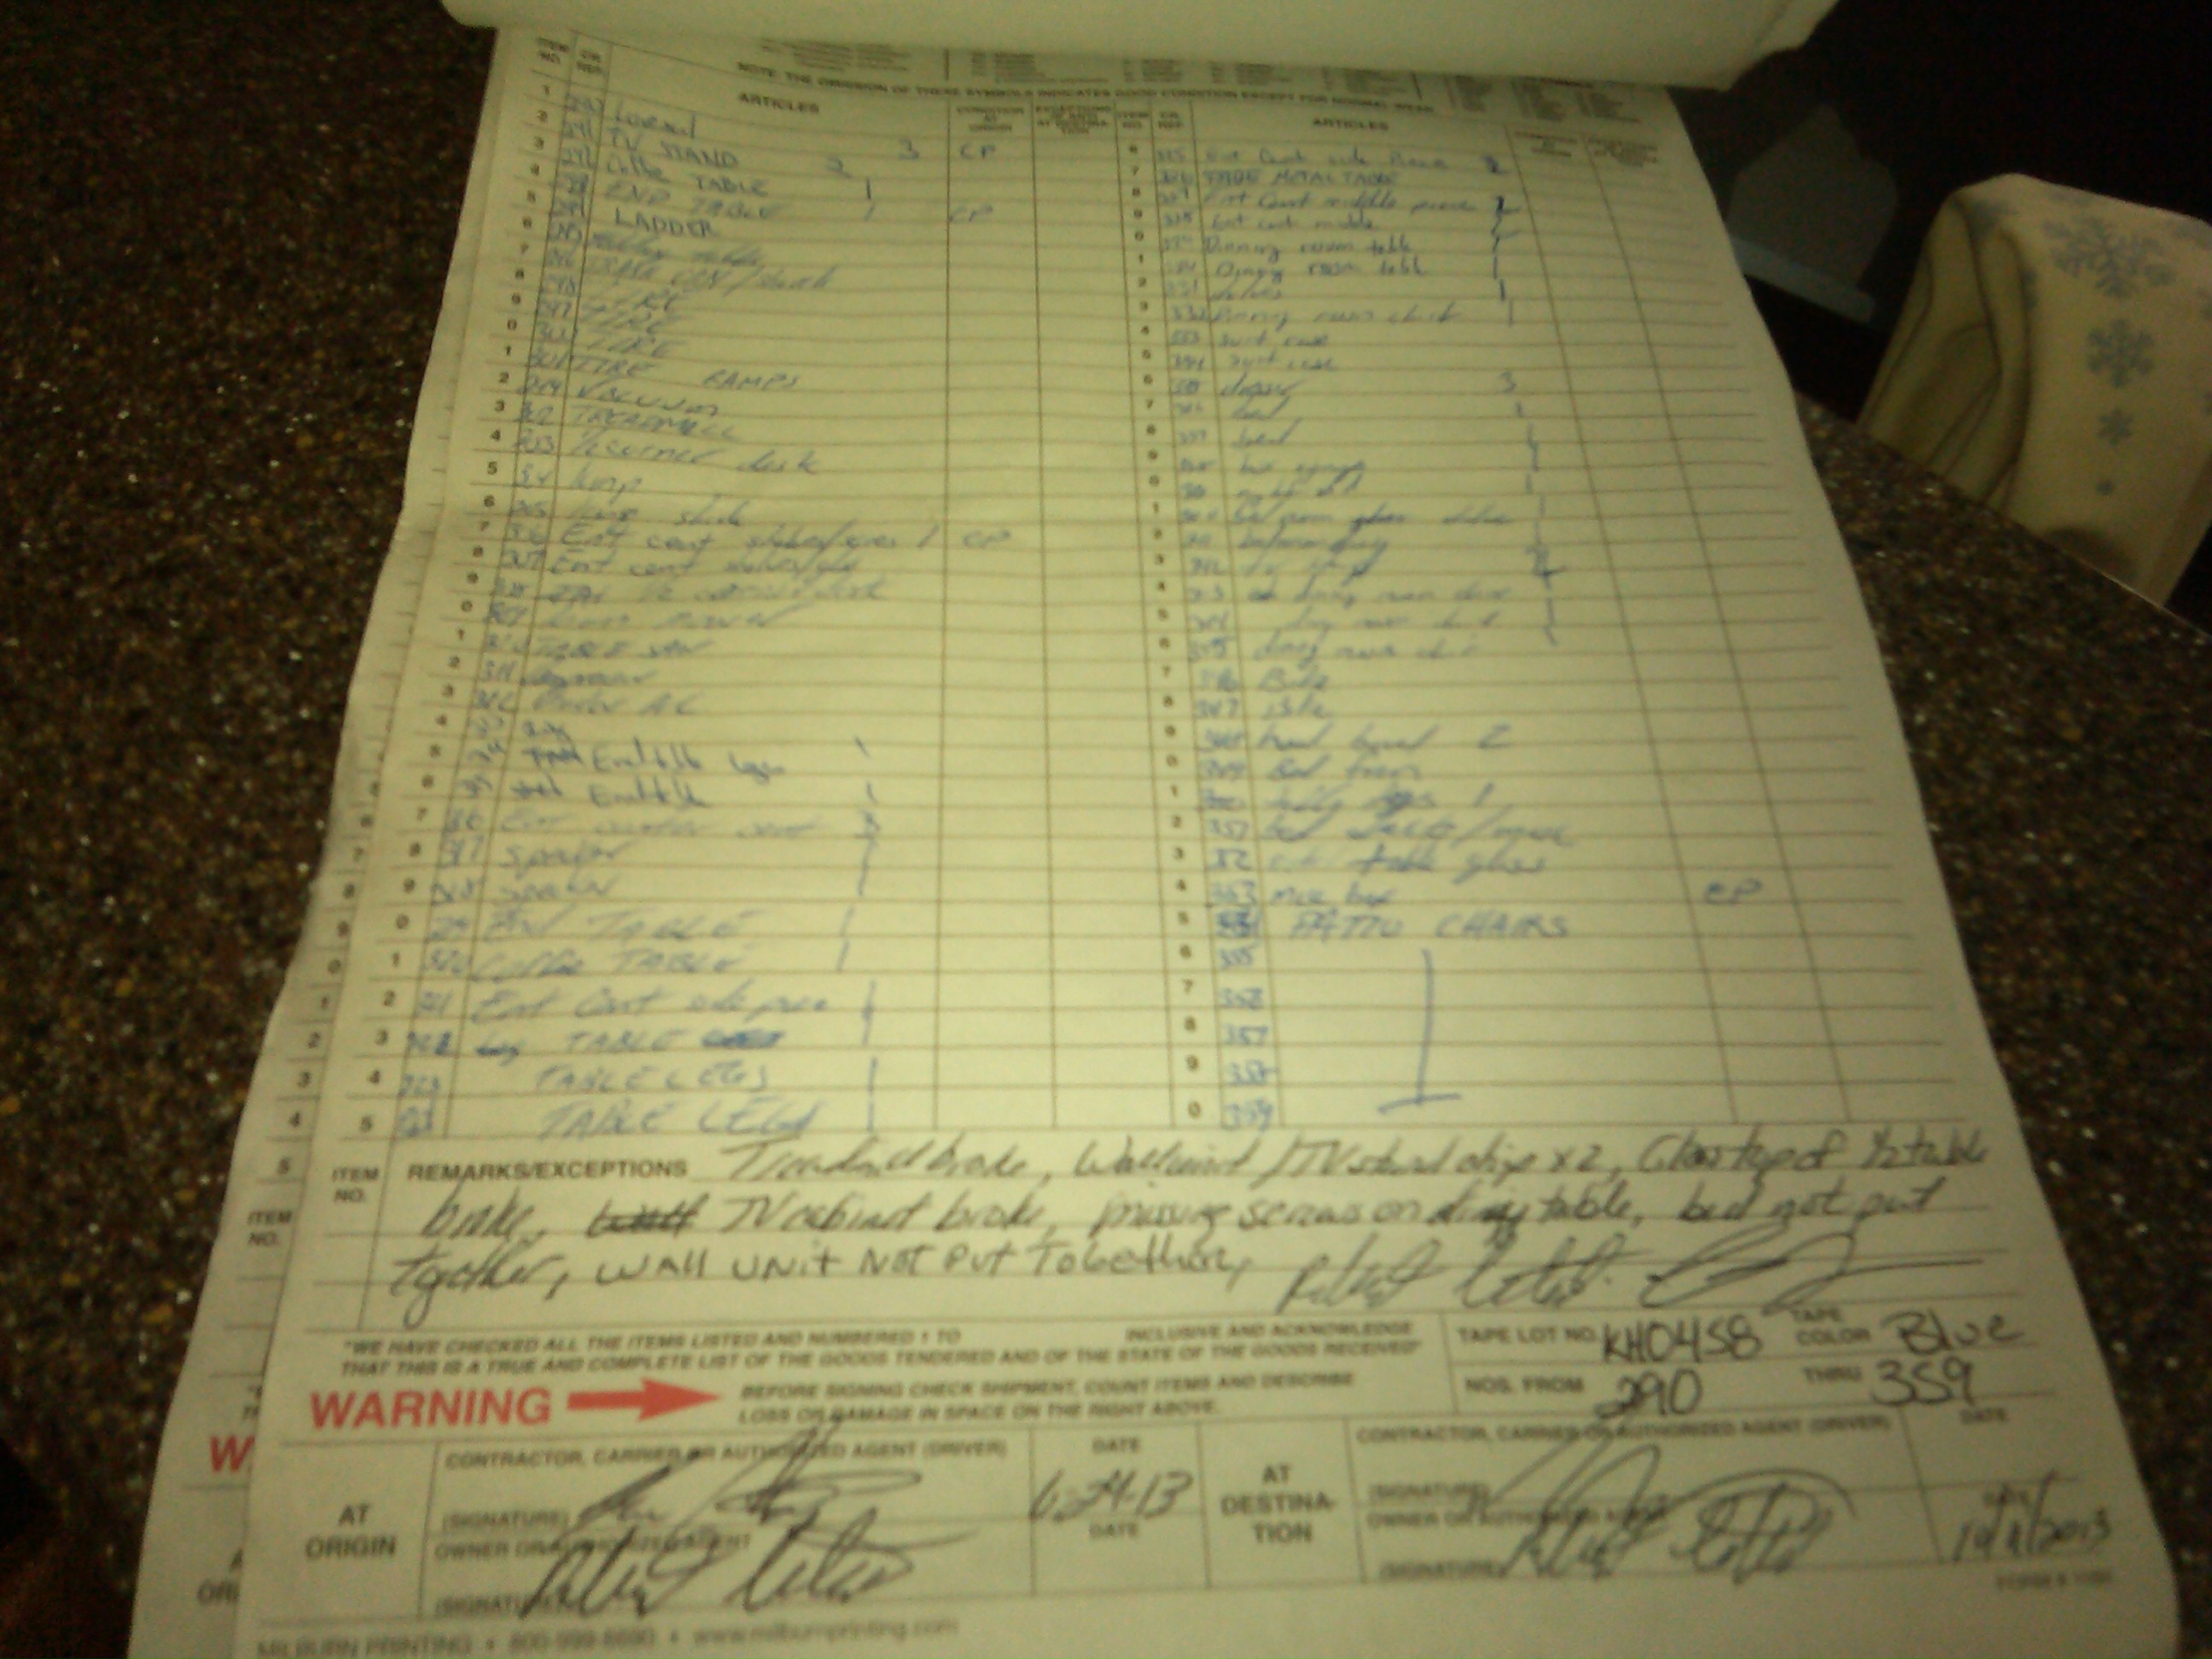 contract of driver signiture next to damaged items and items not put togther
breach of contract